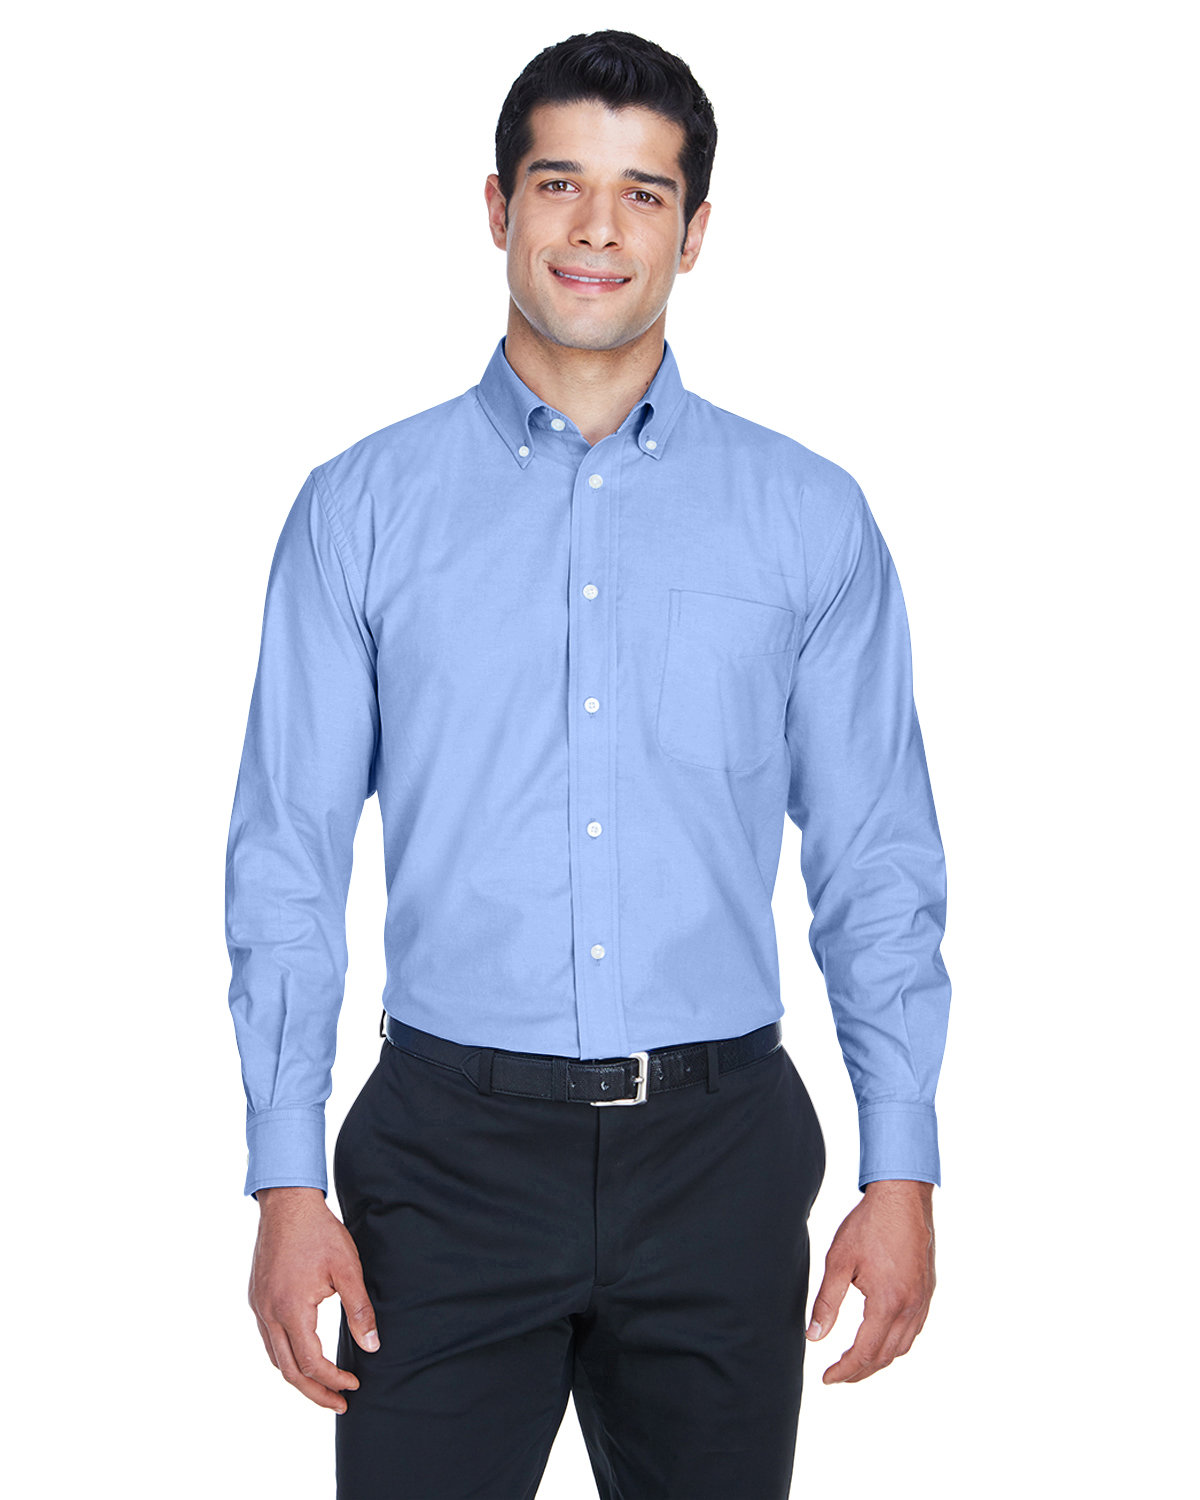 Harriton Men's Long-Sleeve Oxford with Stain-Release LIGHT BLUE 